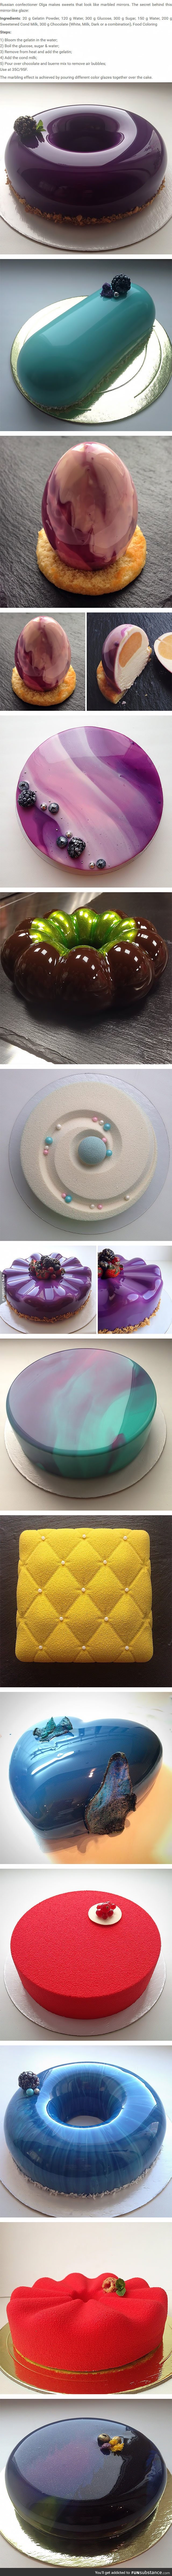 Cakes With This Mirror Finish Are Too Perfect To Be Eaten